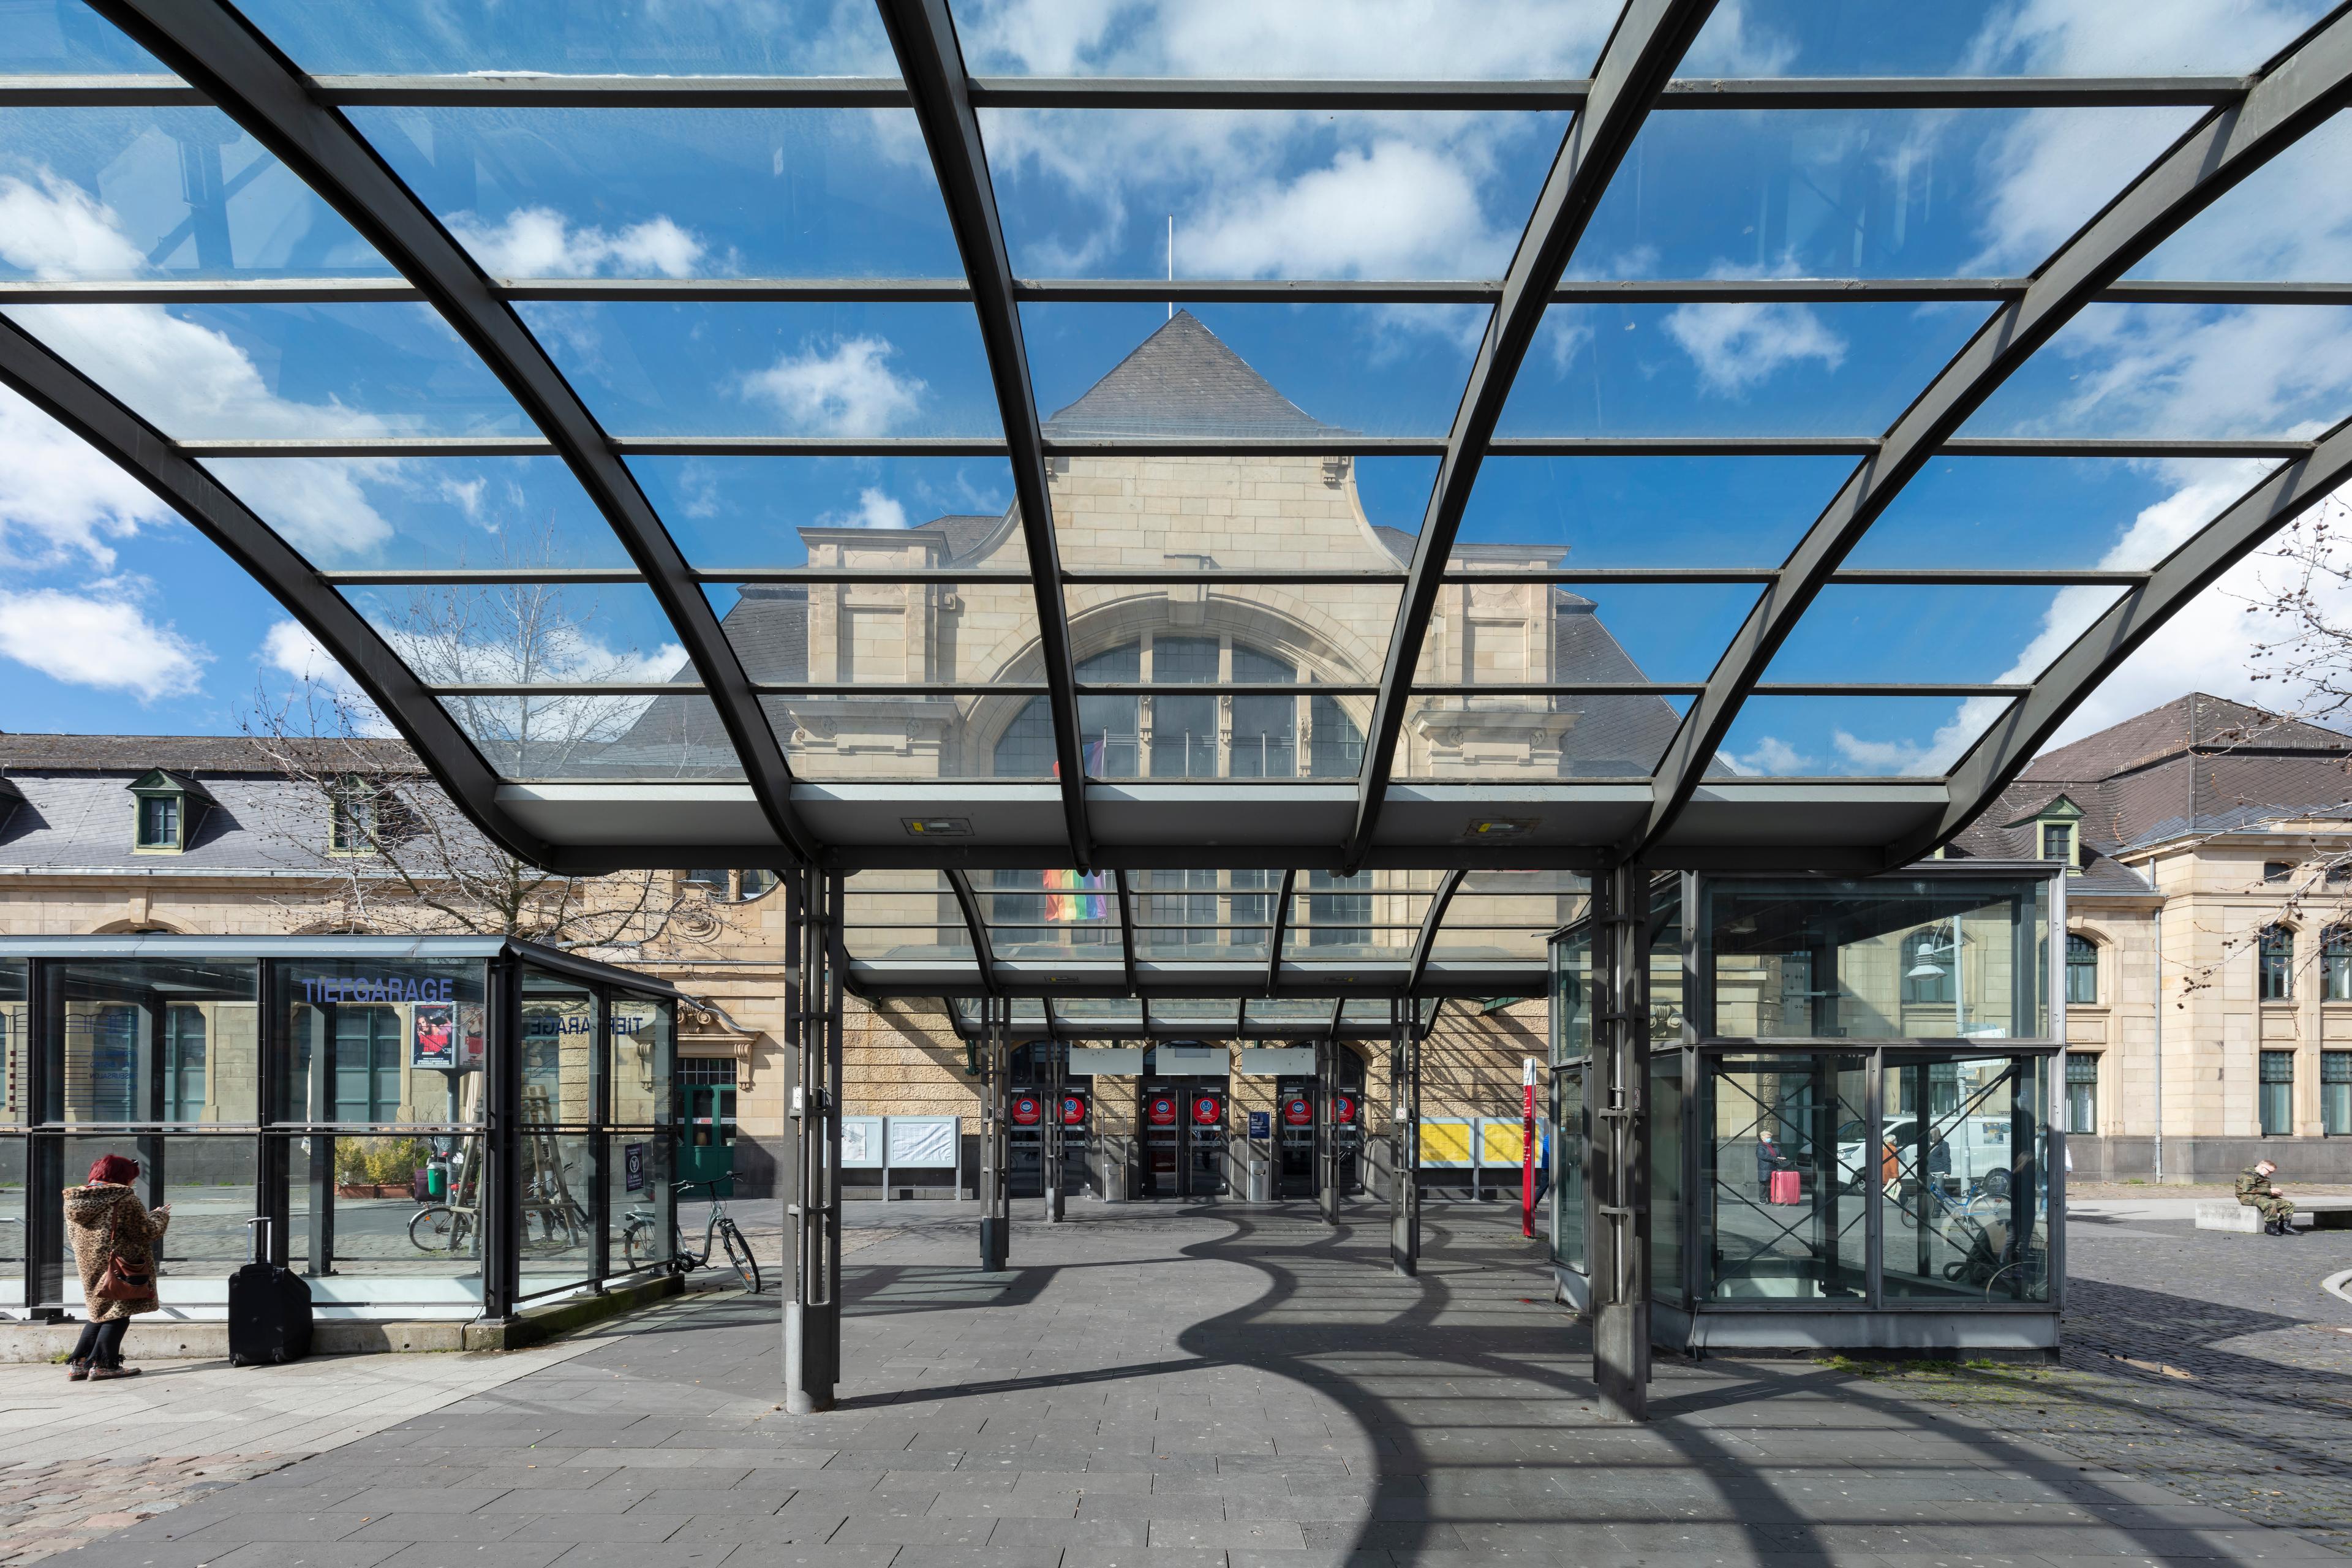 The station building at Koblenz Hauptbahnhof can be reached via a covered walkway.